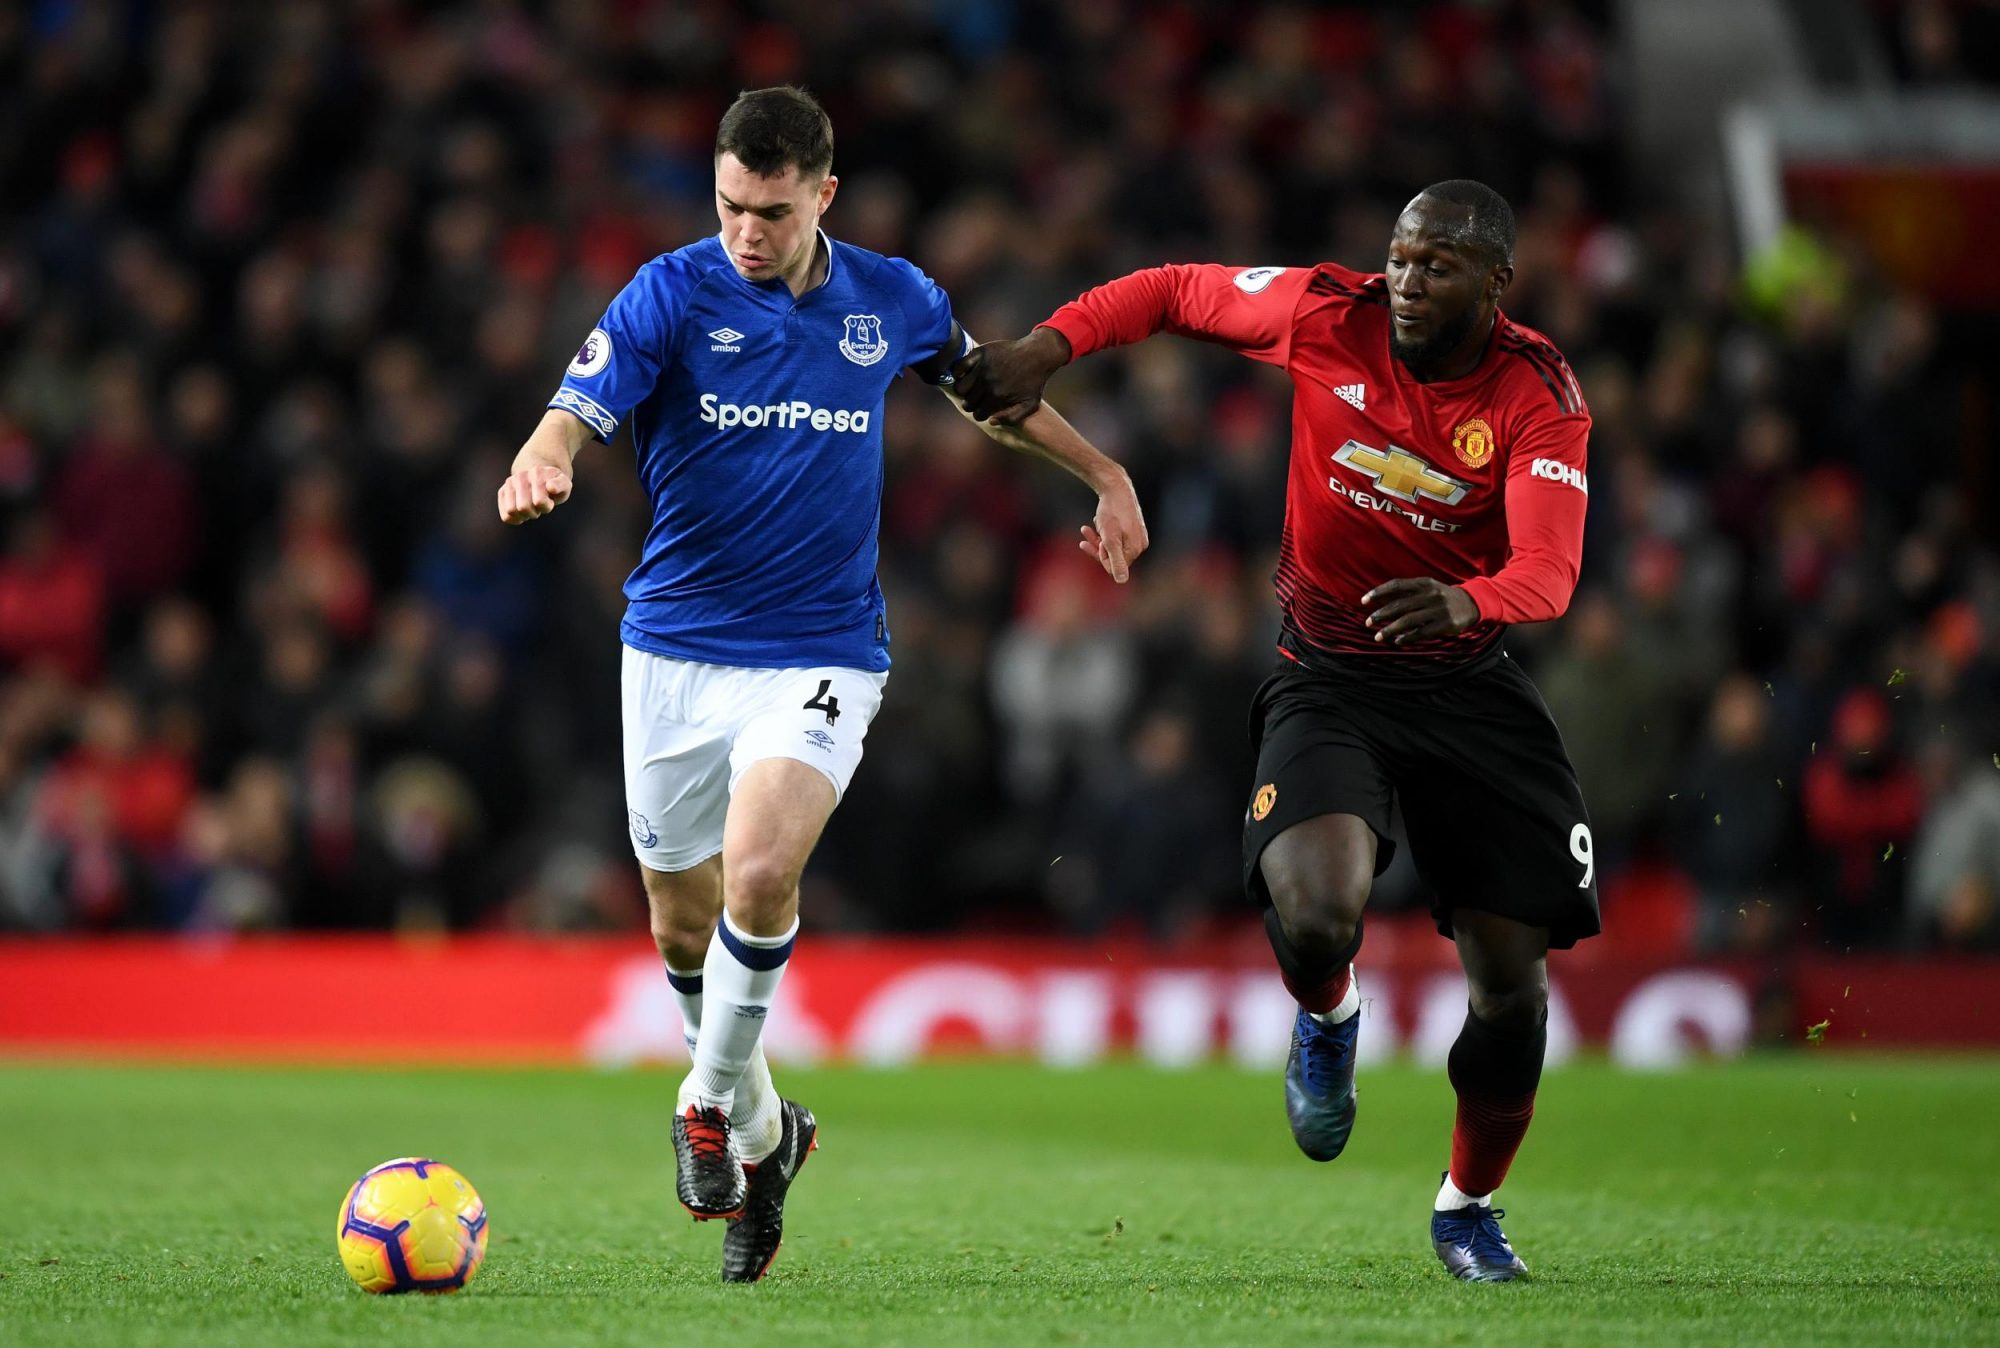 Everton vs Manchester United Preview, Tips and Odds - Sportingpedia